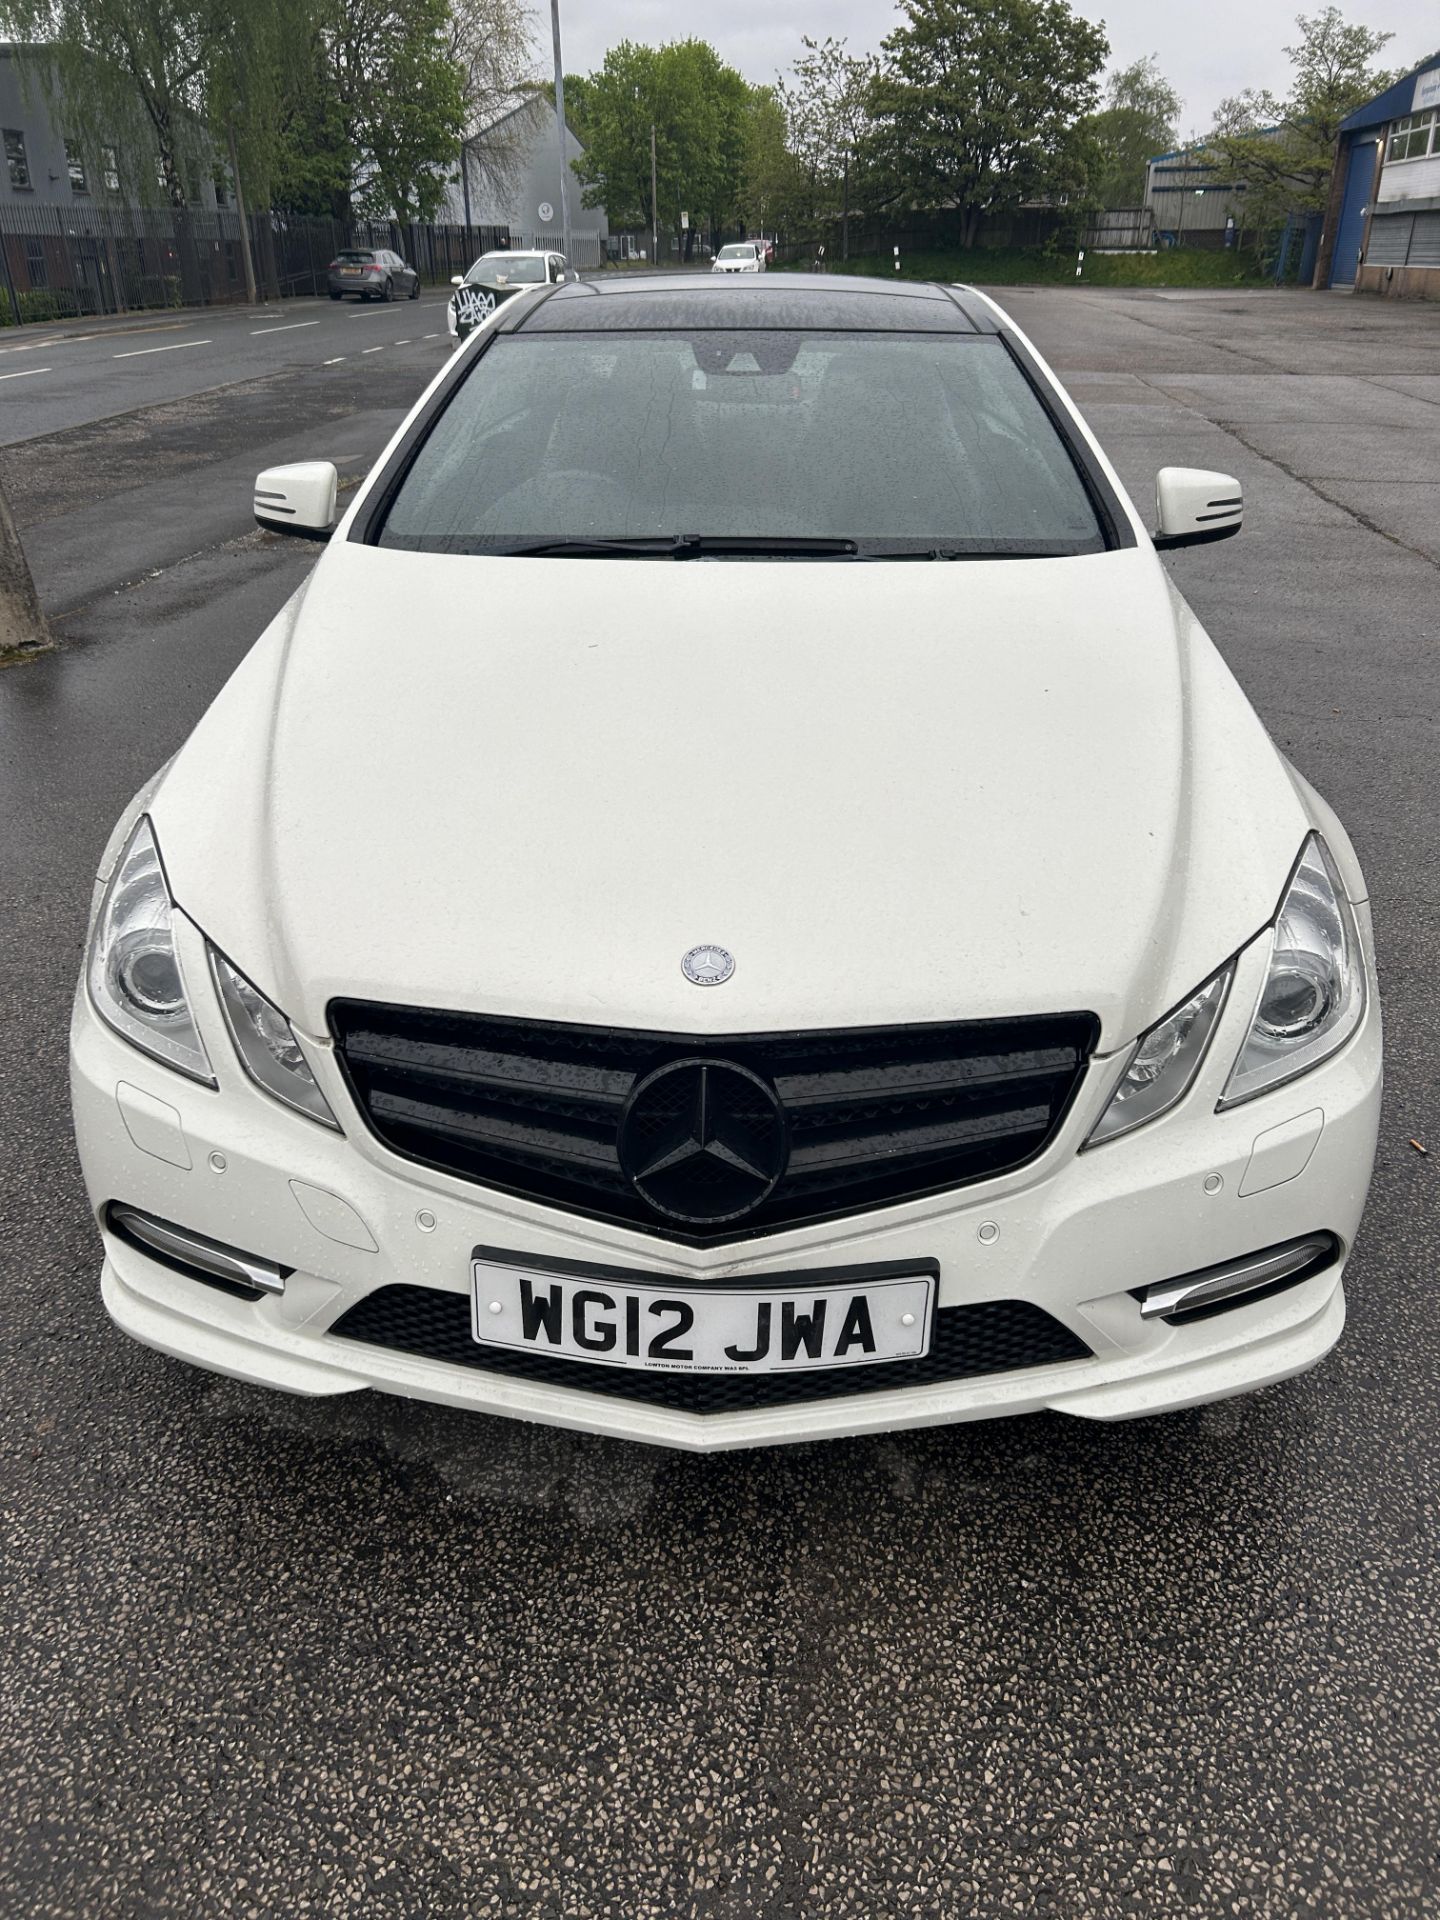 Mercedes Benz E350 SPT CDI BLUECY 265 A | WG12 JWA | Automatic | Diesel | 88,106 Miles | SEE DESCRI - Image 2 of 12